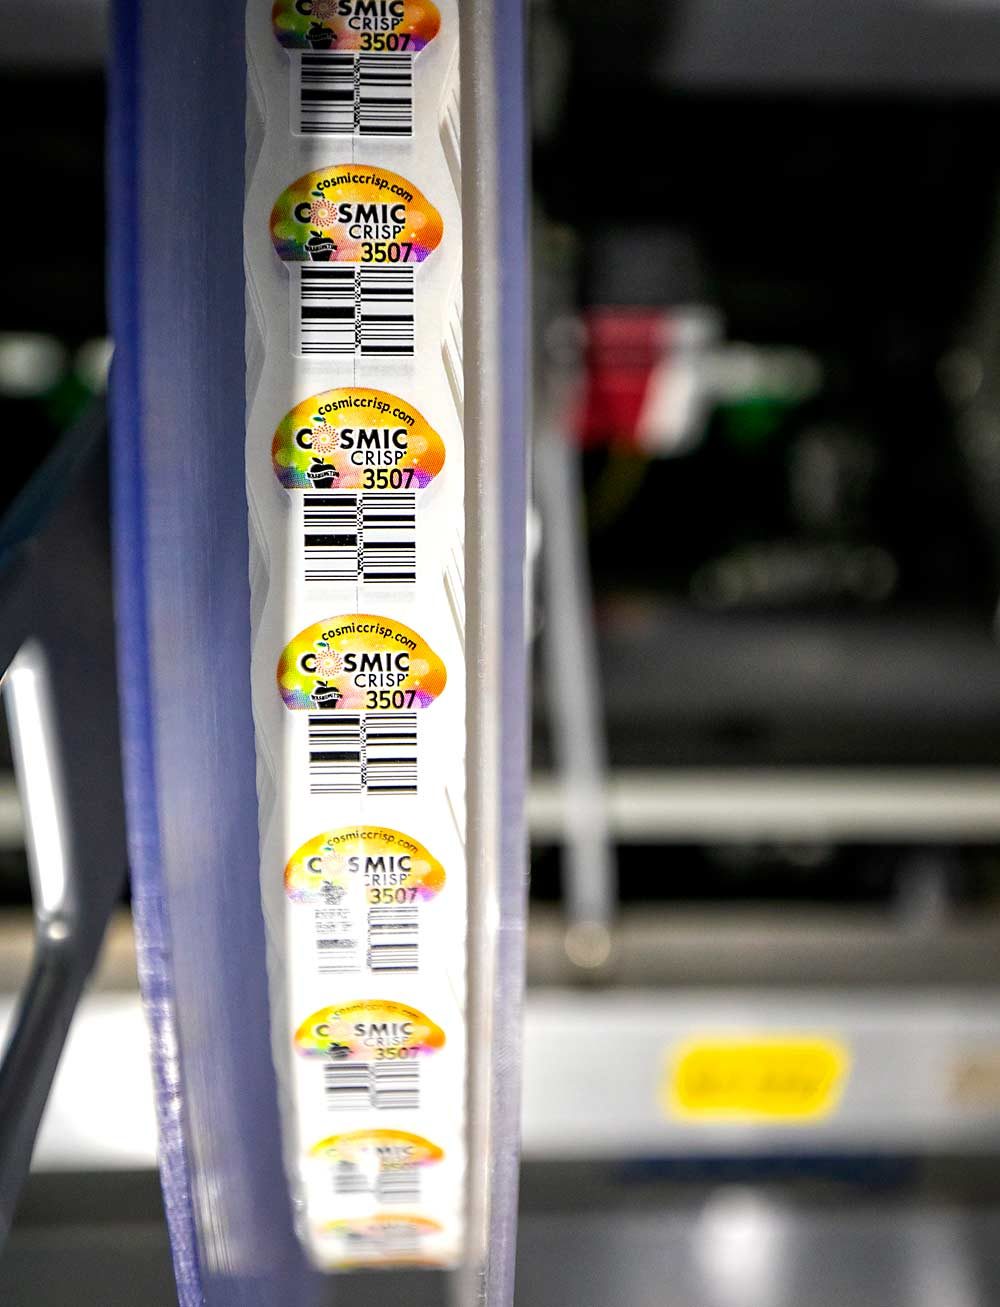 Branded stickers await their apples on the CPC International packing line. “The brand is everything,” said Lynnell Brandt, president of Proprietary Variety Management, the company steering the commercial release of Cosmic Crisp. “And we want to make this a global brand.” (TJ Mullinax/Good Fruit Grower)